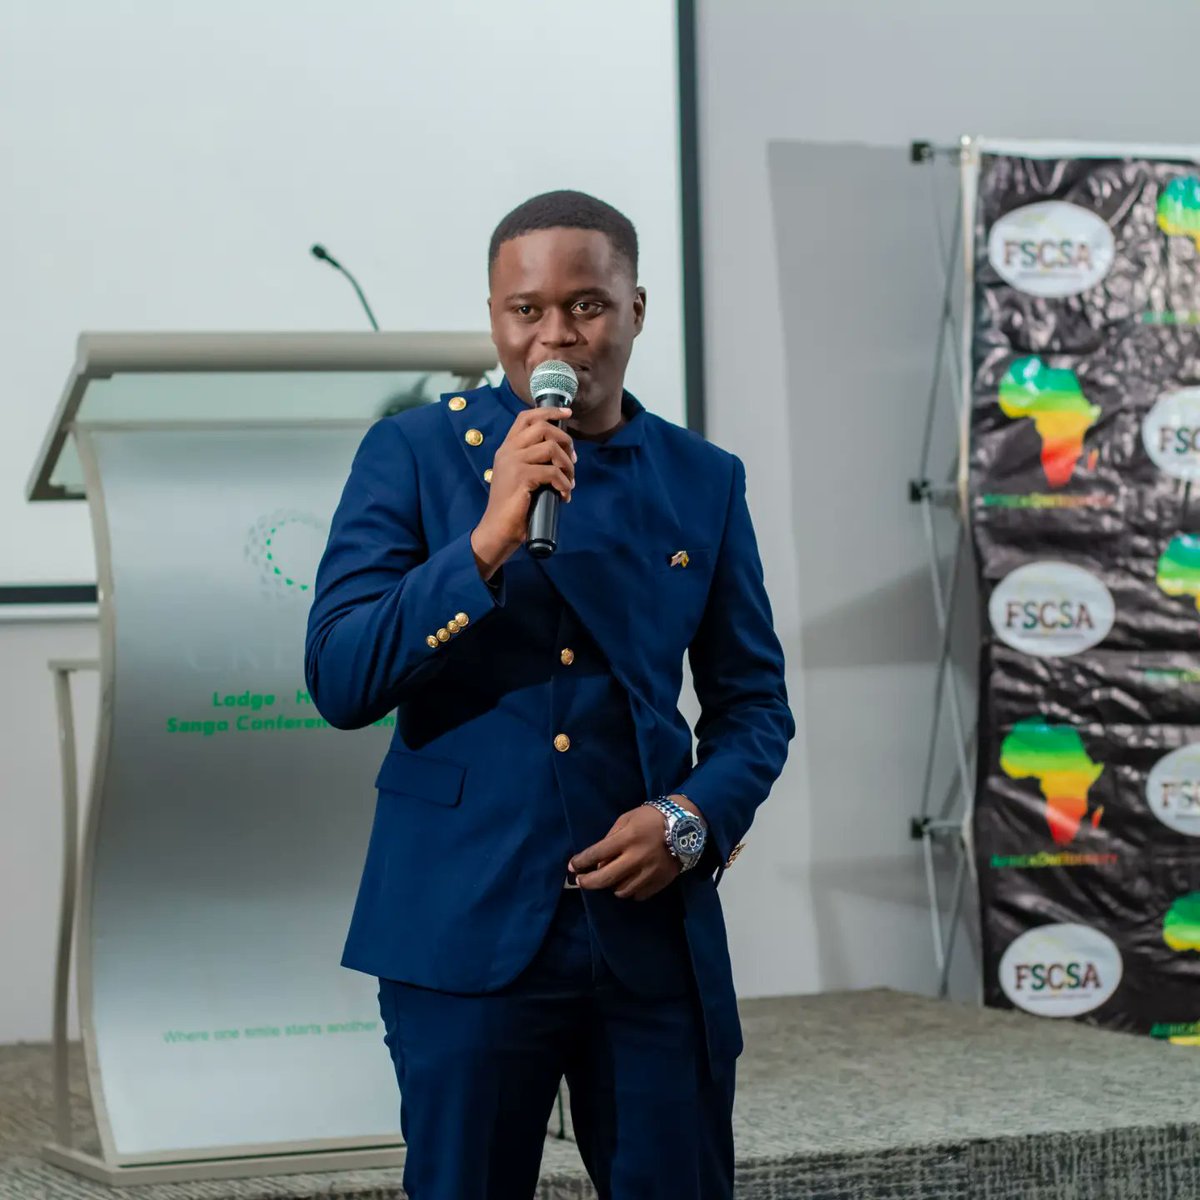 I had an incredible experience hosting the One Africa Identify 3-day Business seminar in Harare! It was inspiring to connect with amazing entrepreneurs from across Africa.